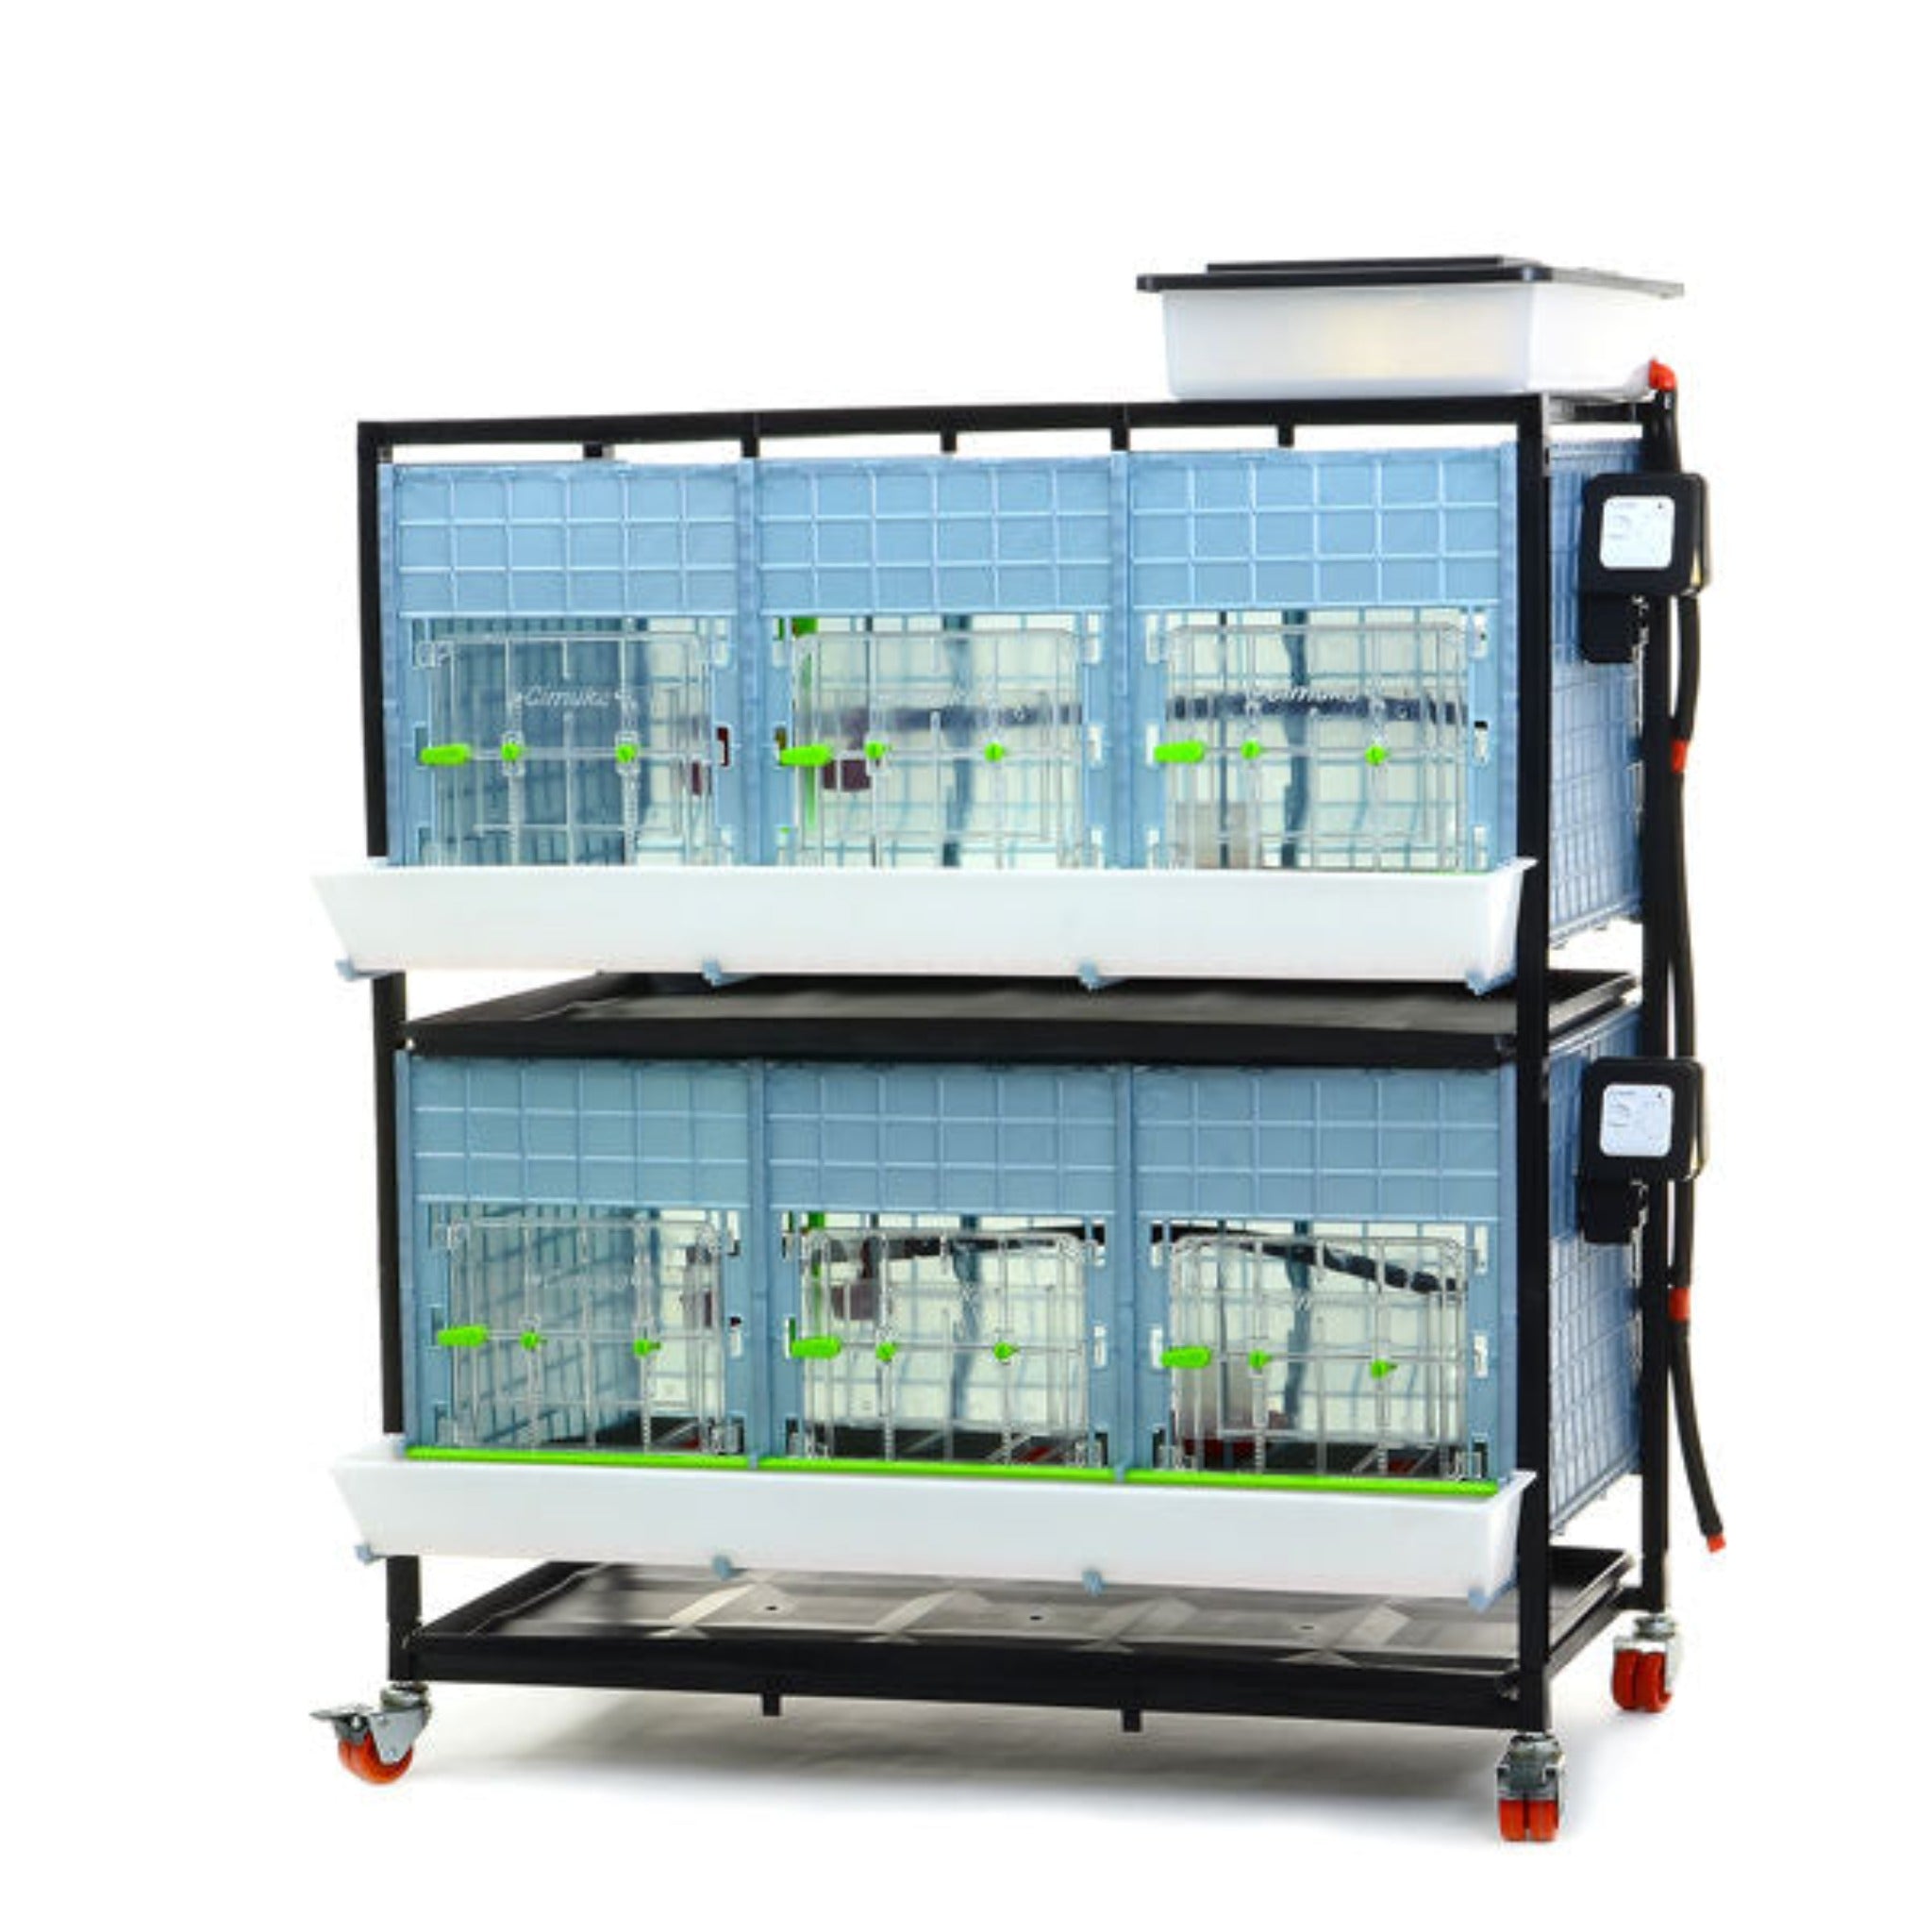 Hatching Time Cimuka 2 Layer 15 Inch Brooder front visible. Feeding trough is located on front of brooders. Clear plastic doors with locks can be seen. Heater thermostat visible on side of brooders. Brooders are on Metal frame with rolling casters for mobility.